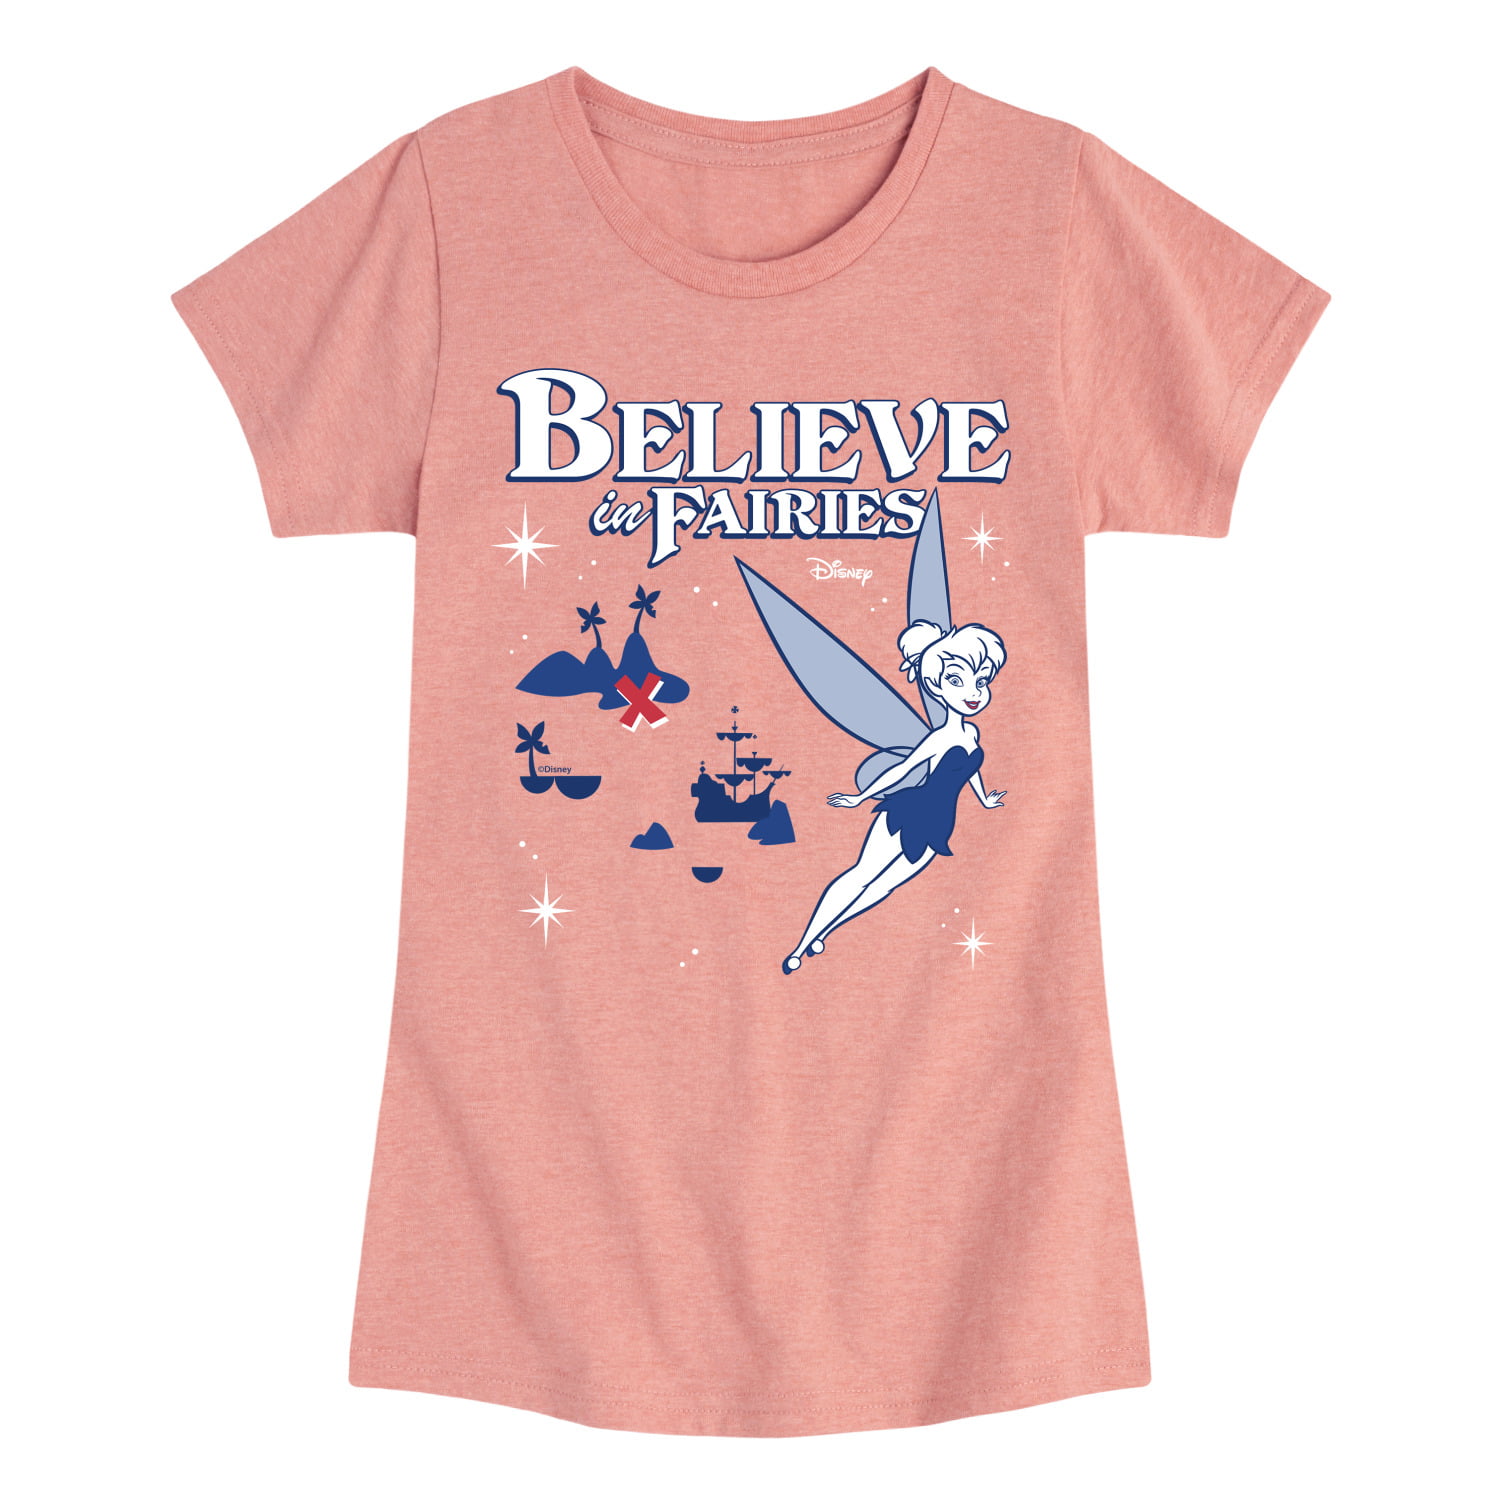 Disney - Peter Pan - Tinkerbell - Believe in Fairies - Toddler And Youth  Girls Short Sleeve Graphic T-Shirt